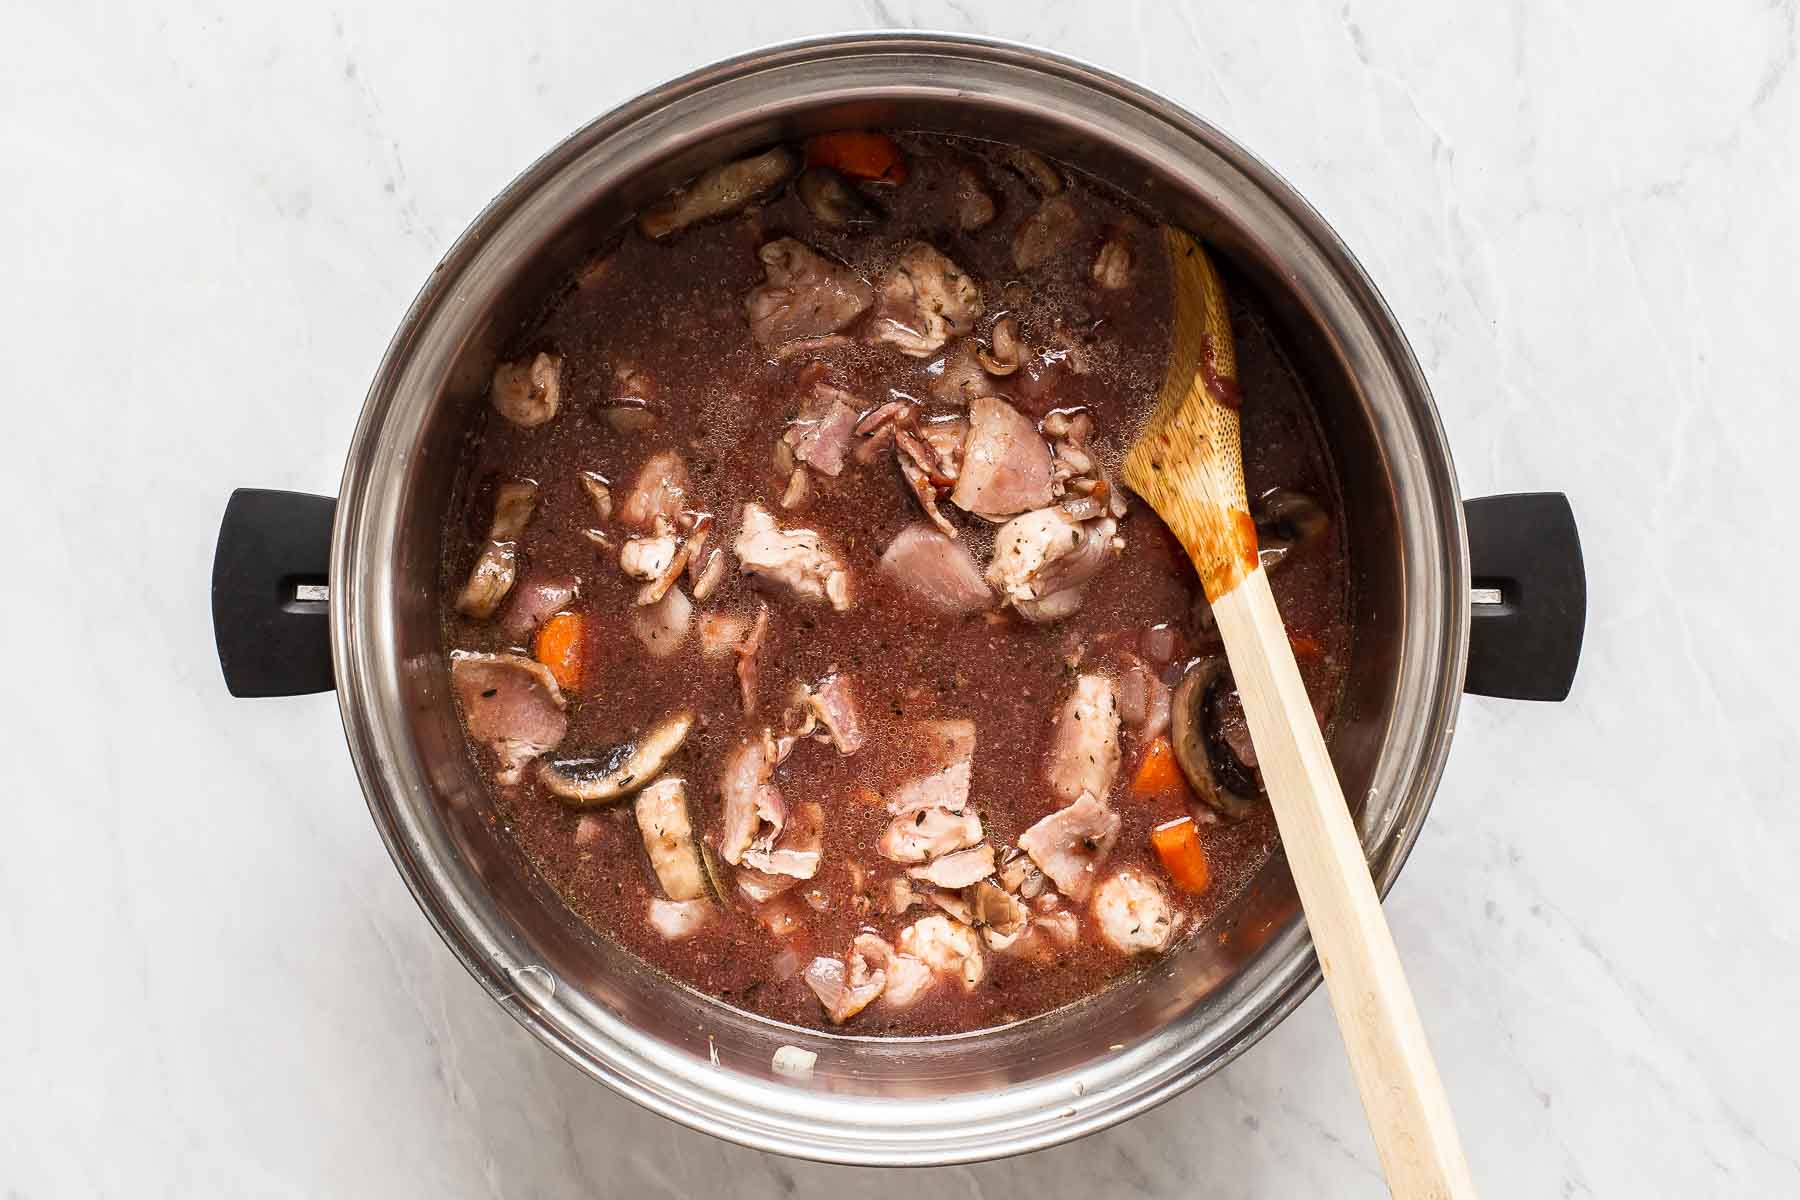 Red wine in a stew pot with vegetables and chicken.